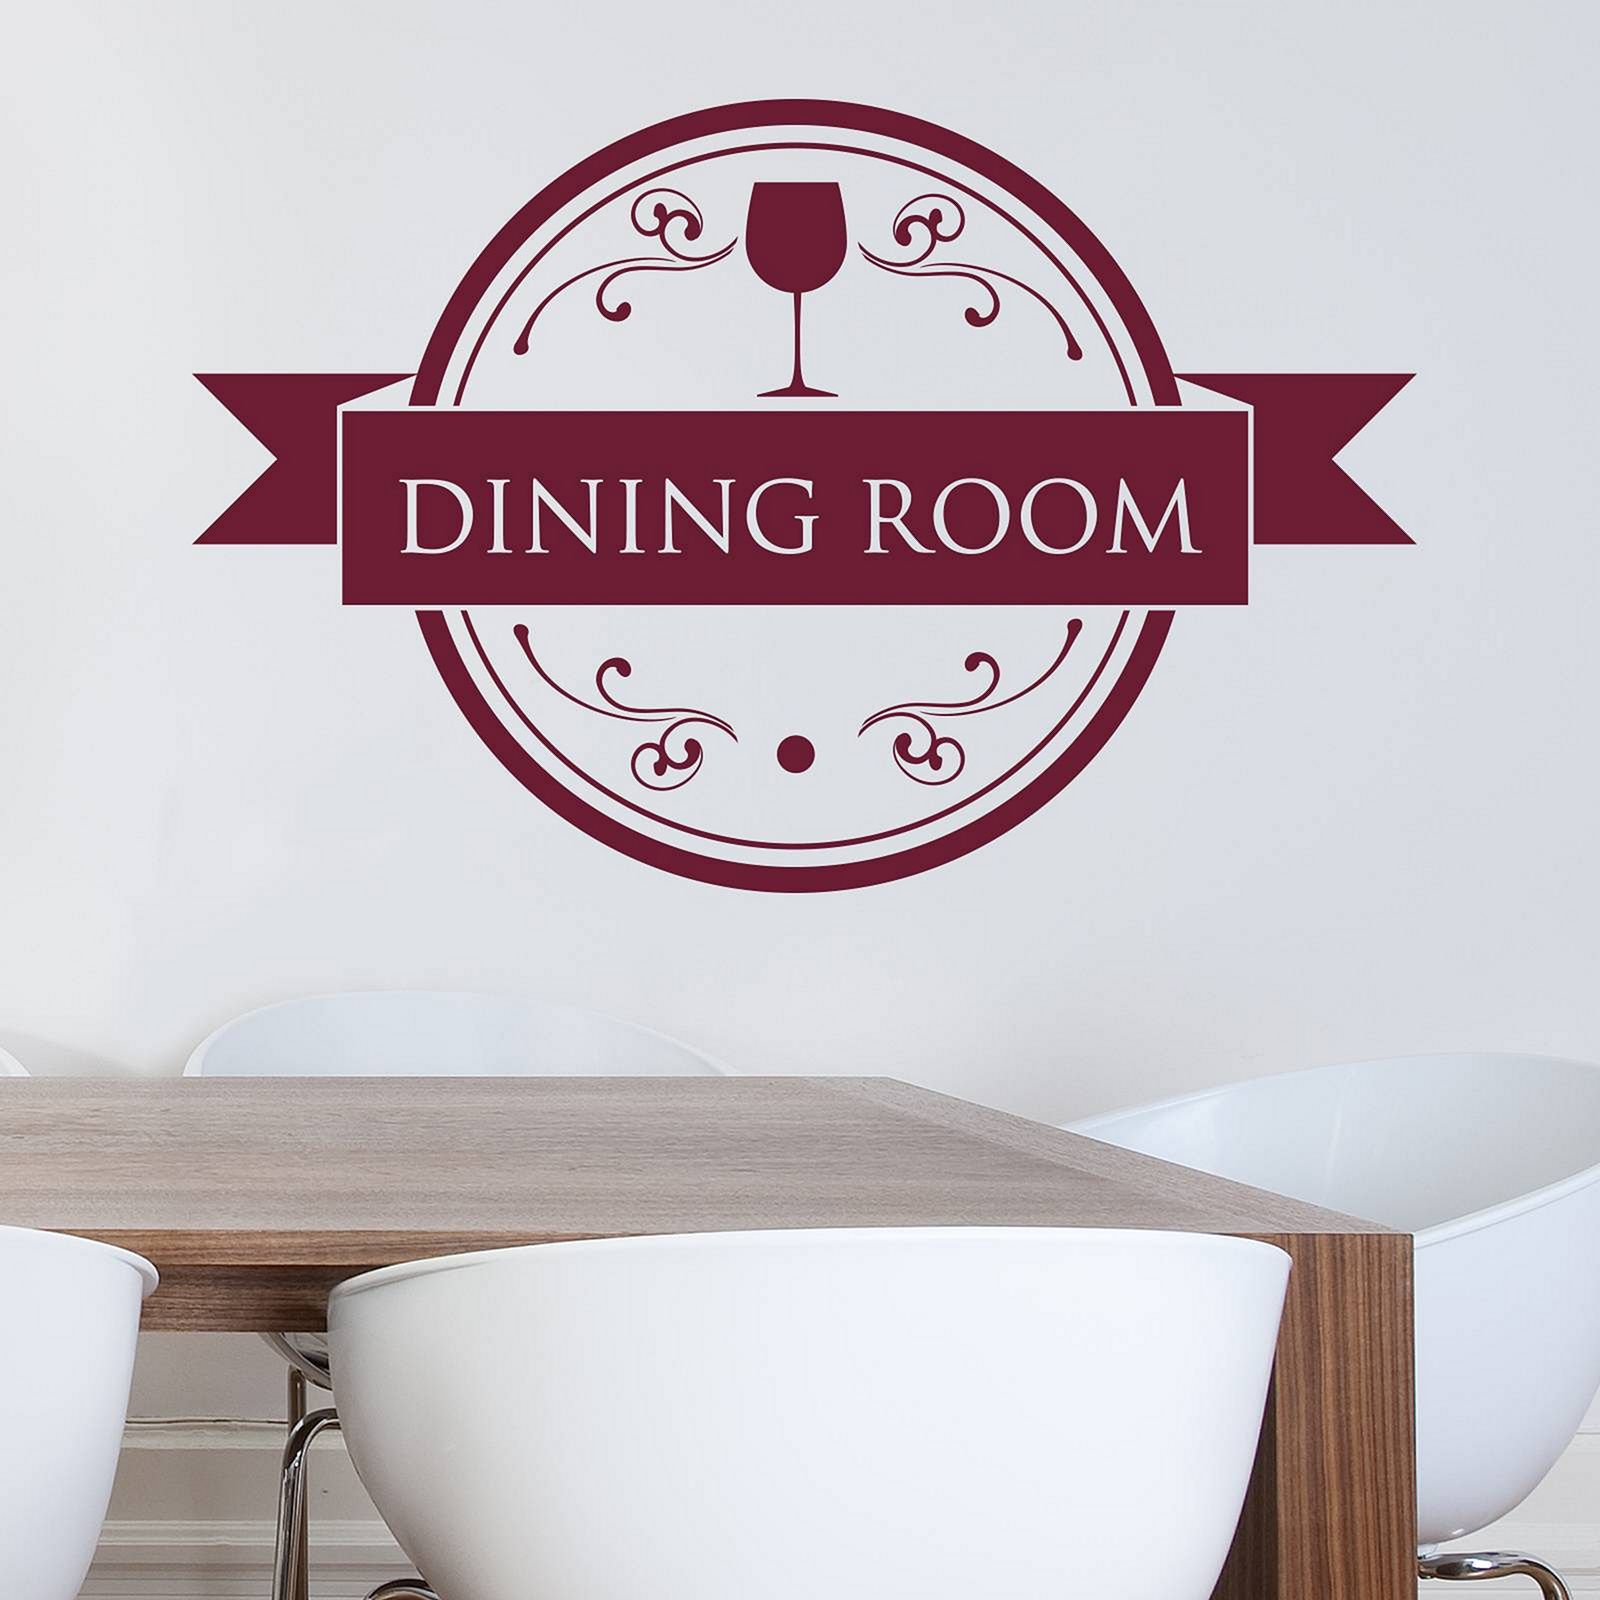 Dining Room Wall Decal 7